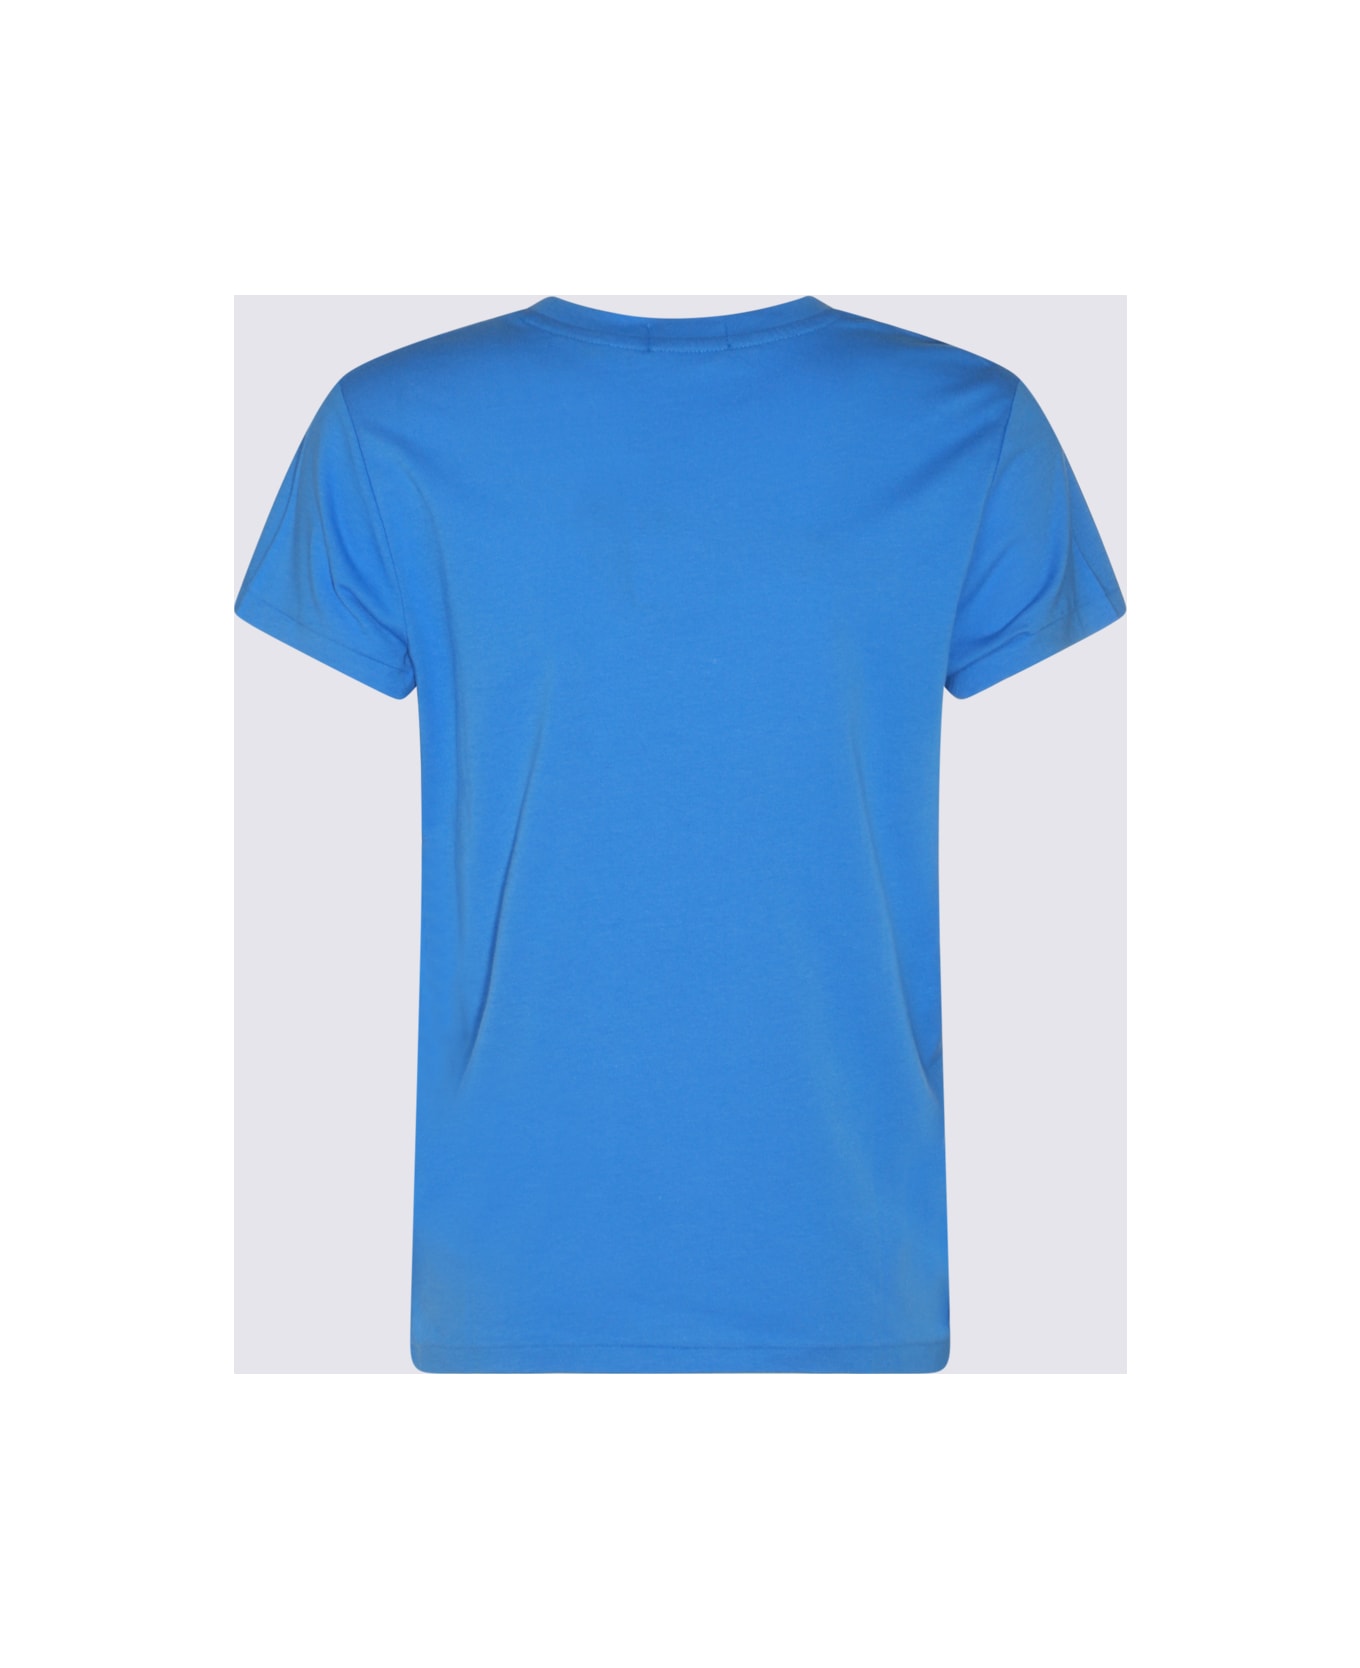 Polo Ralph Lauren Cobalt Blue And White Cotton T-shirt - COLBY BLUE Tシャツ